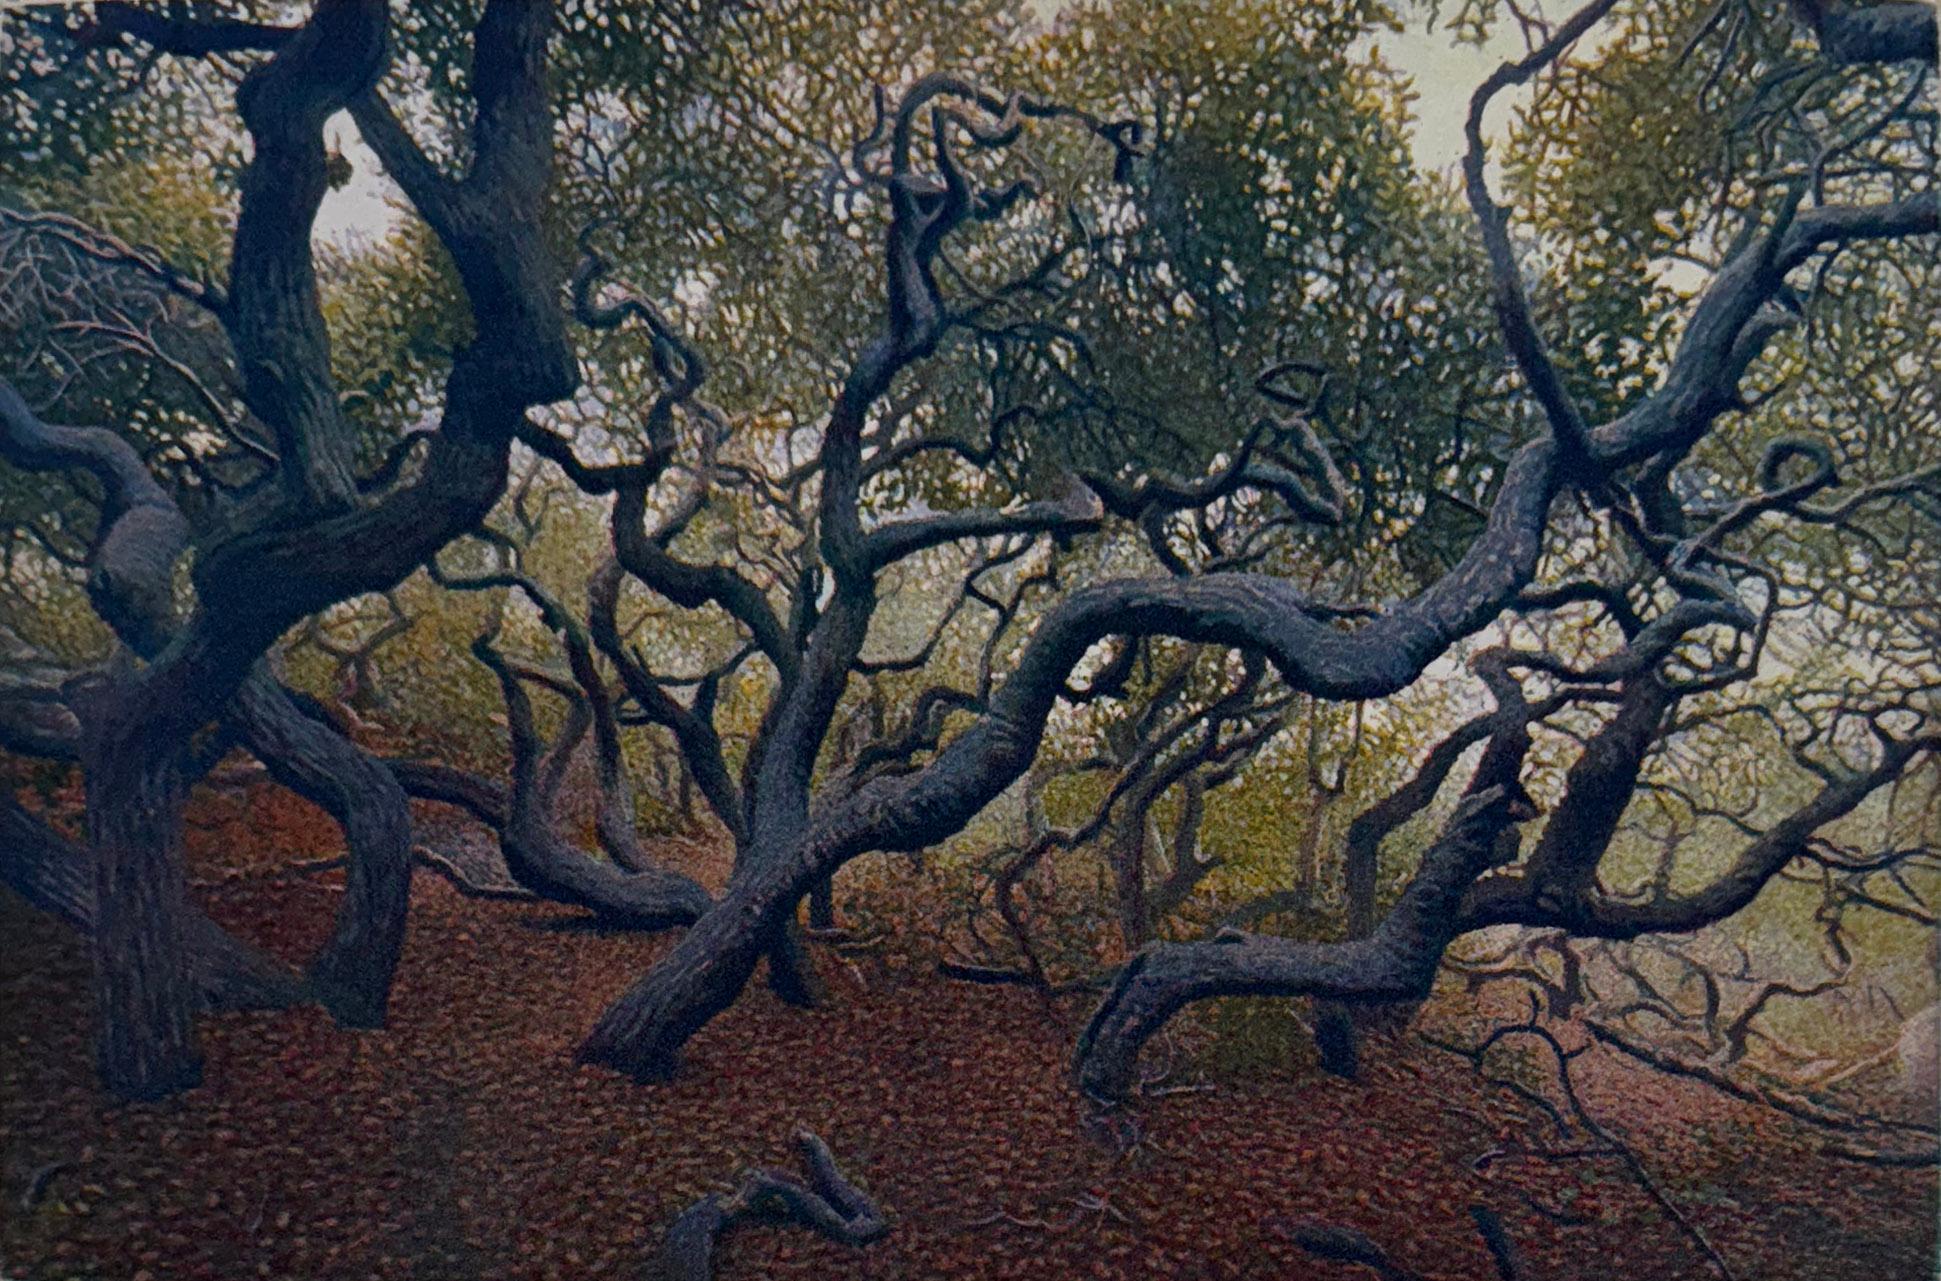 Medium: etching and aquatint
Edition of 200
Year: 2019
Image Size: 6 x 9 inches
Signed, titled and numbered by the artist.

The Elfin Forest is a grove of pygmy live oak trees just south of Moro Bay. Though a small grove, it is easy to get lost in